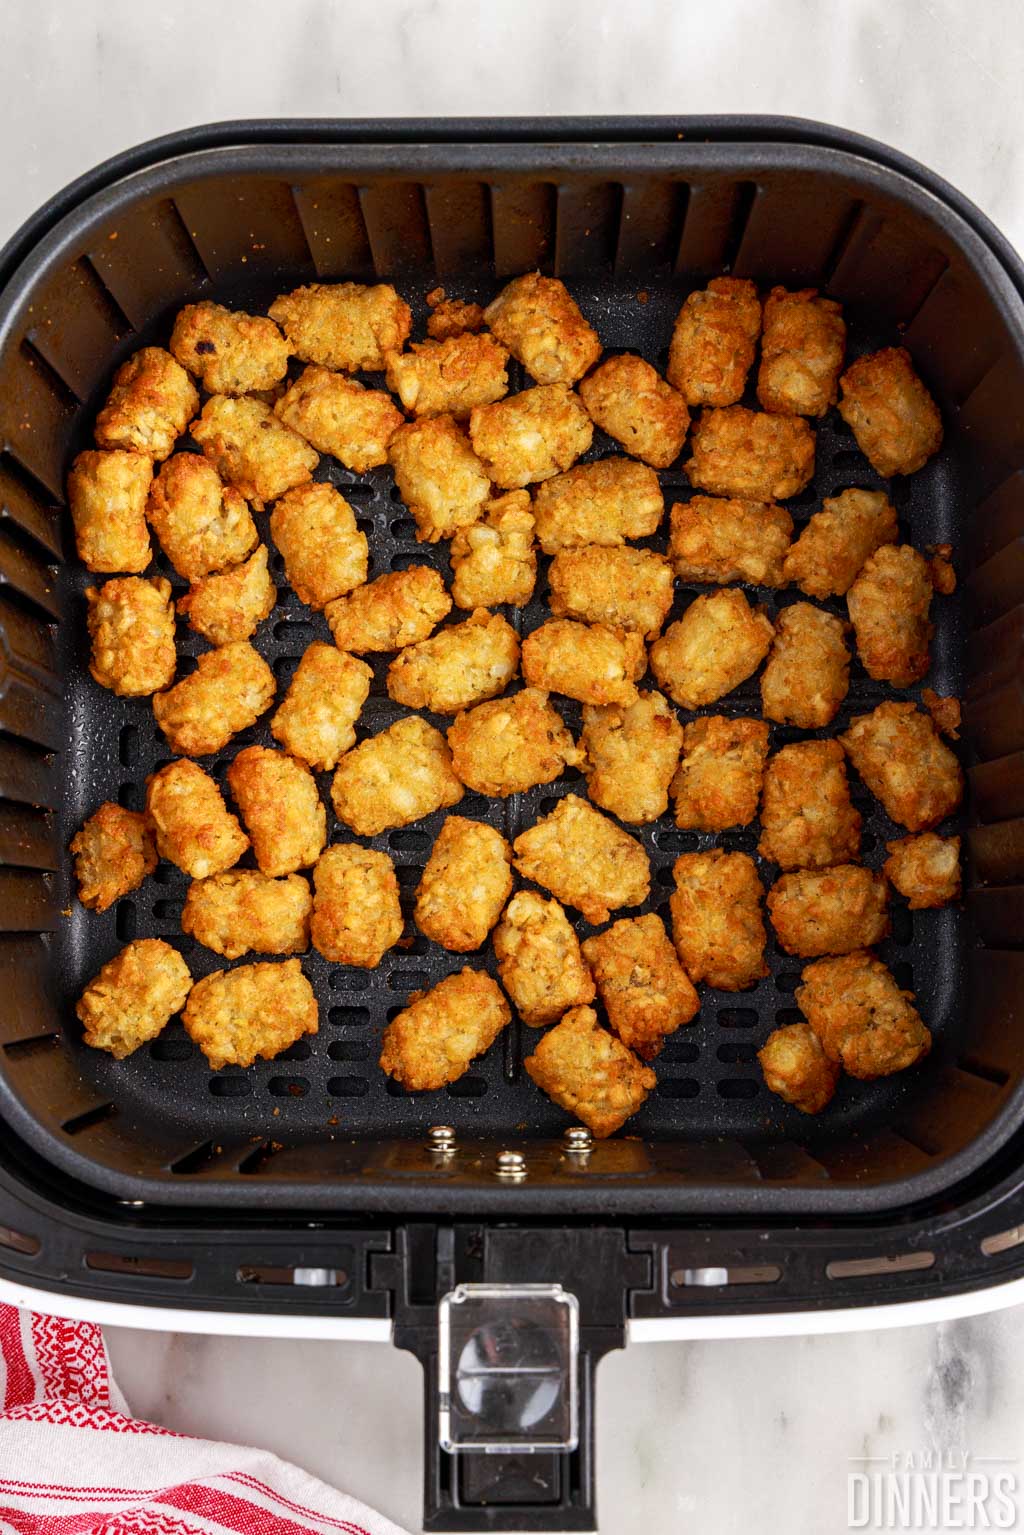 How To Cook Tater Tots In Air Fryer